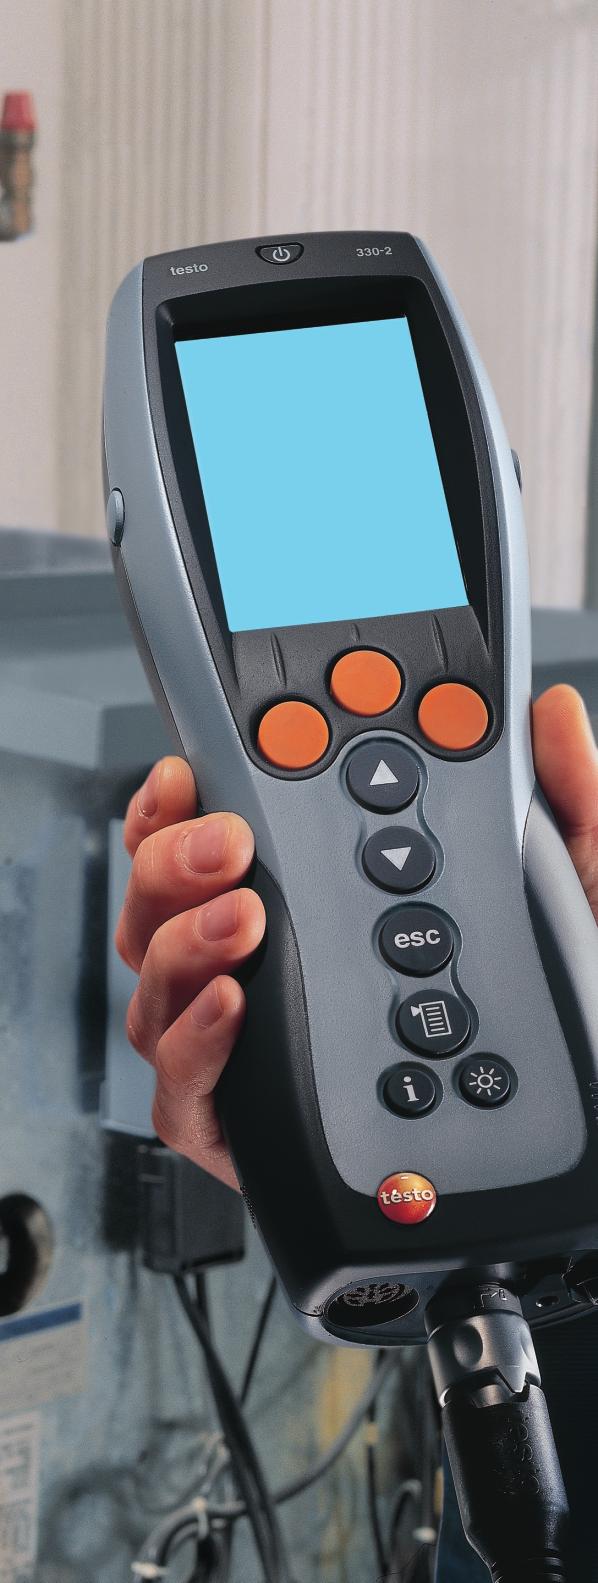 10 testo 330 Flue gas analysis with increased convenience and safety How many degrees is it really?